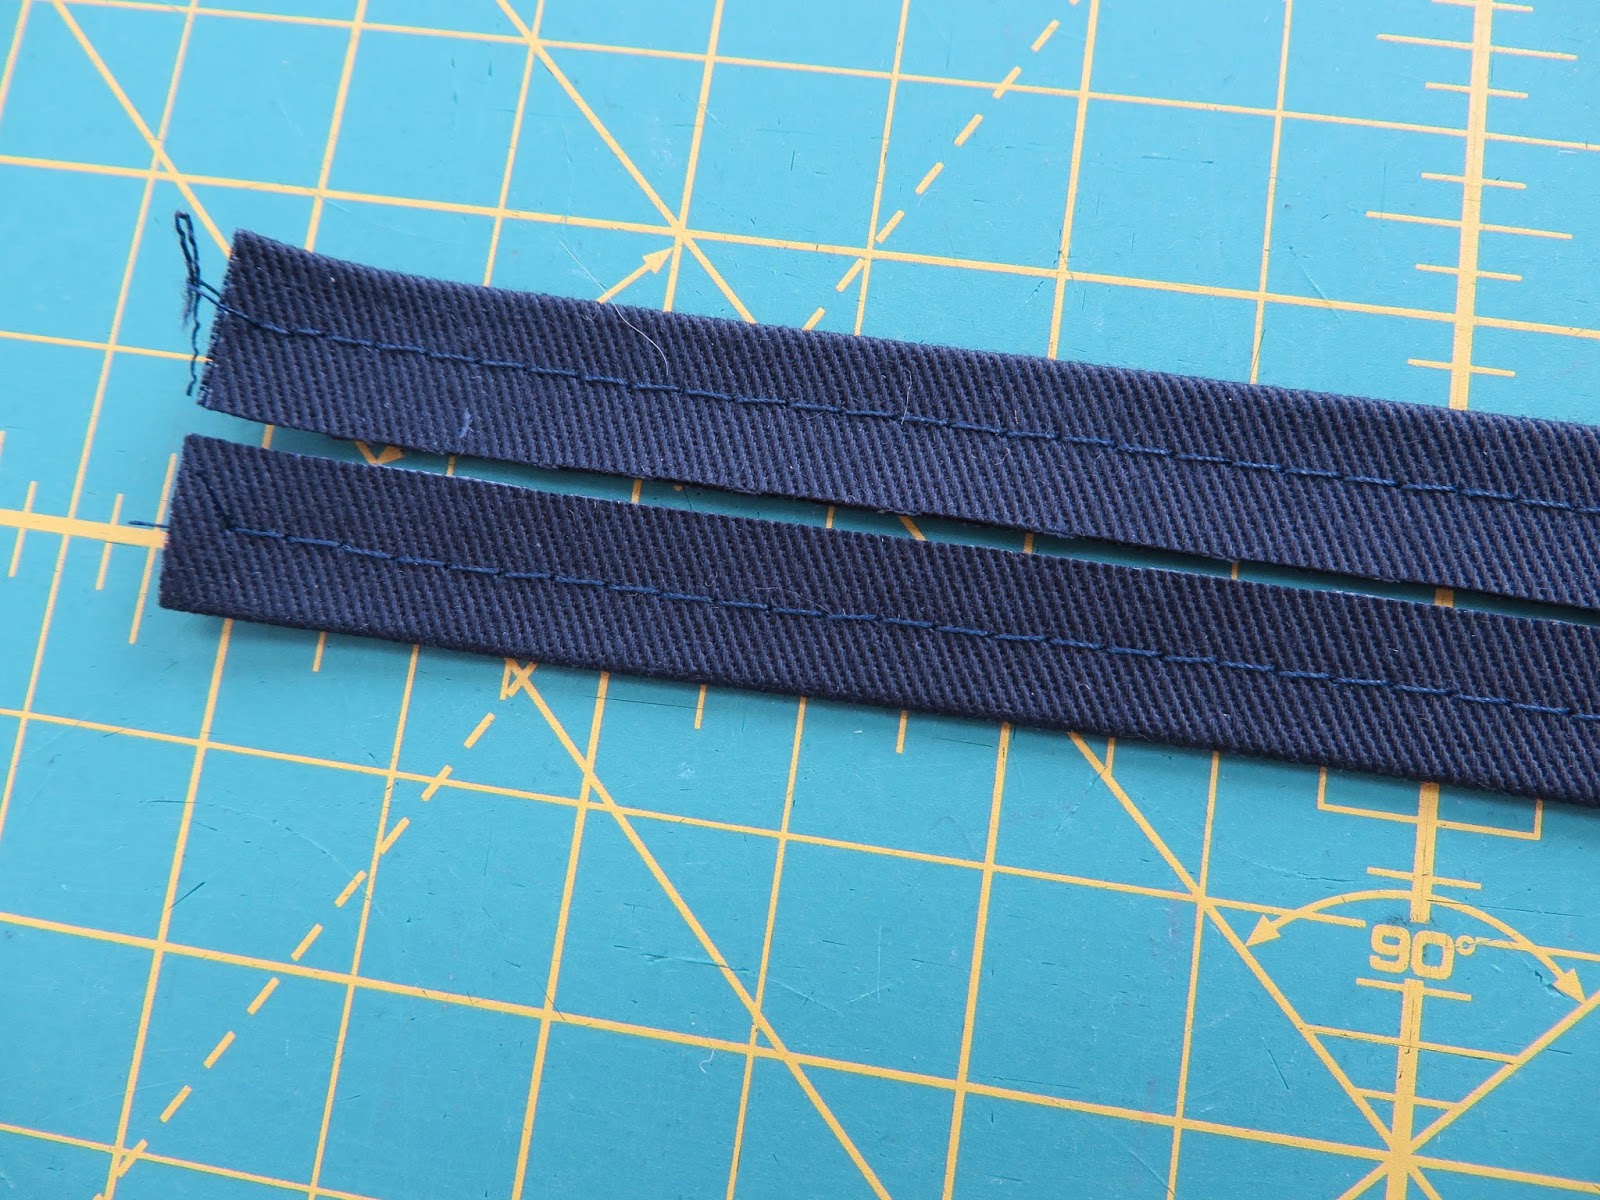 today's agenda: Making a Double Welt Pocket with Flap, part 1